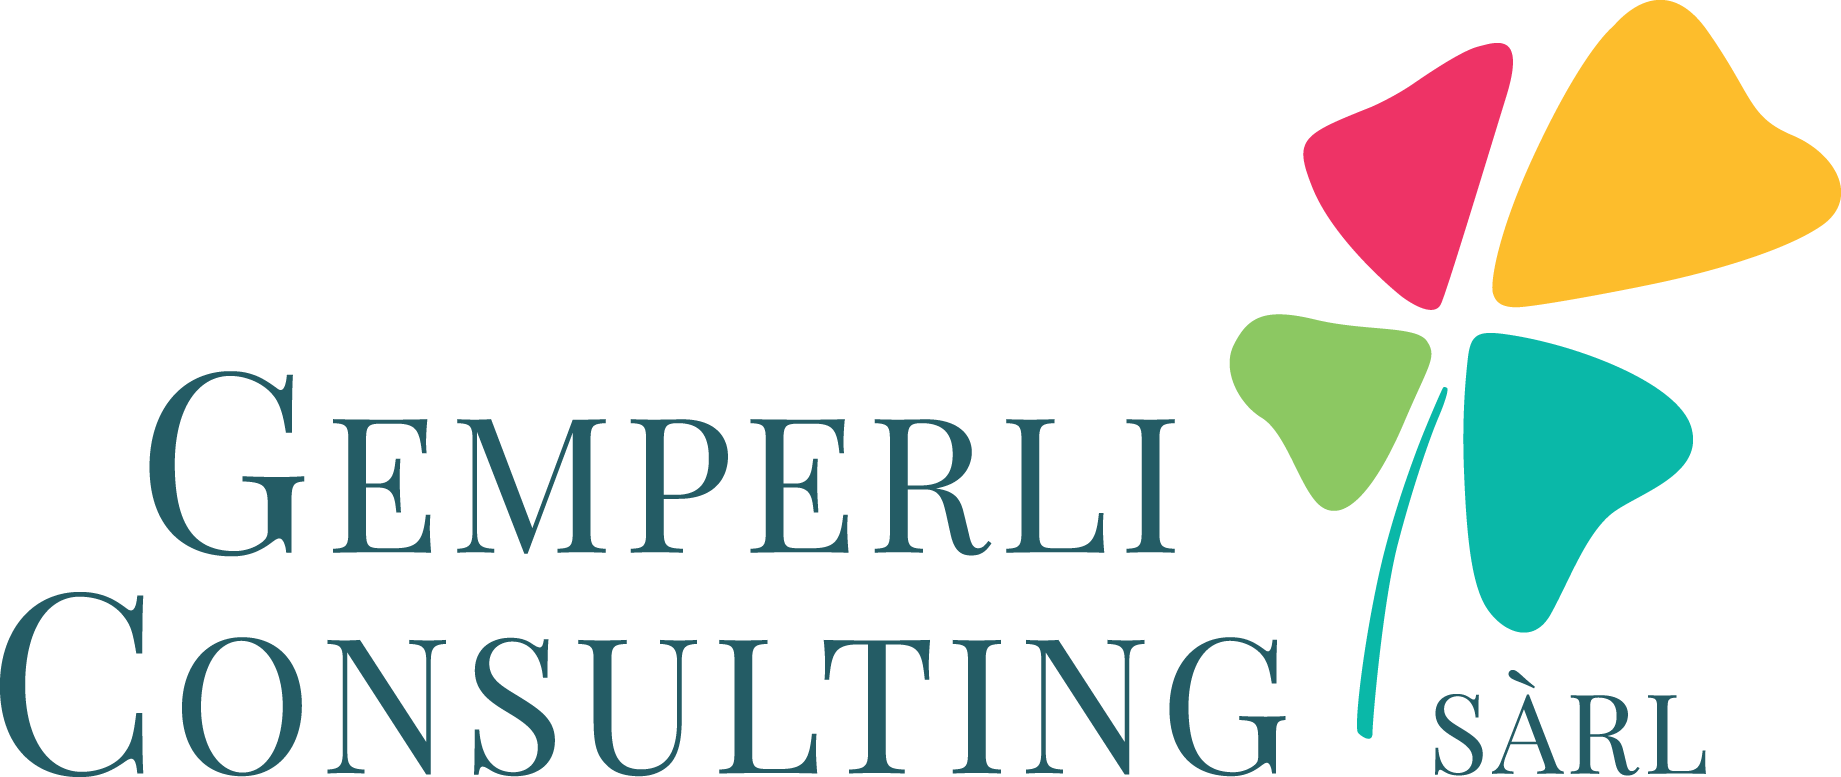 https://amiable.ch/wp-content/uploads/2020/11/logo_gemperli_consulting_2lignes_couleur_pos_RVB.png